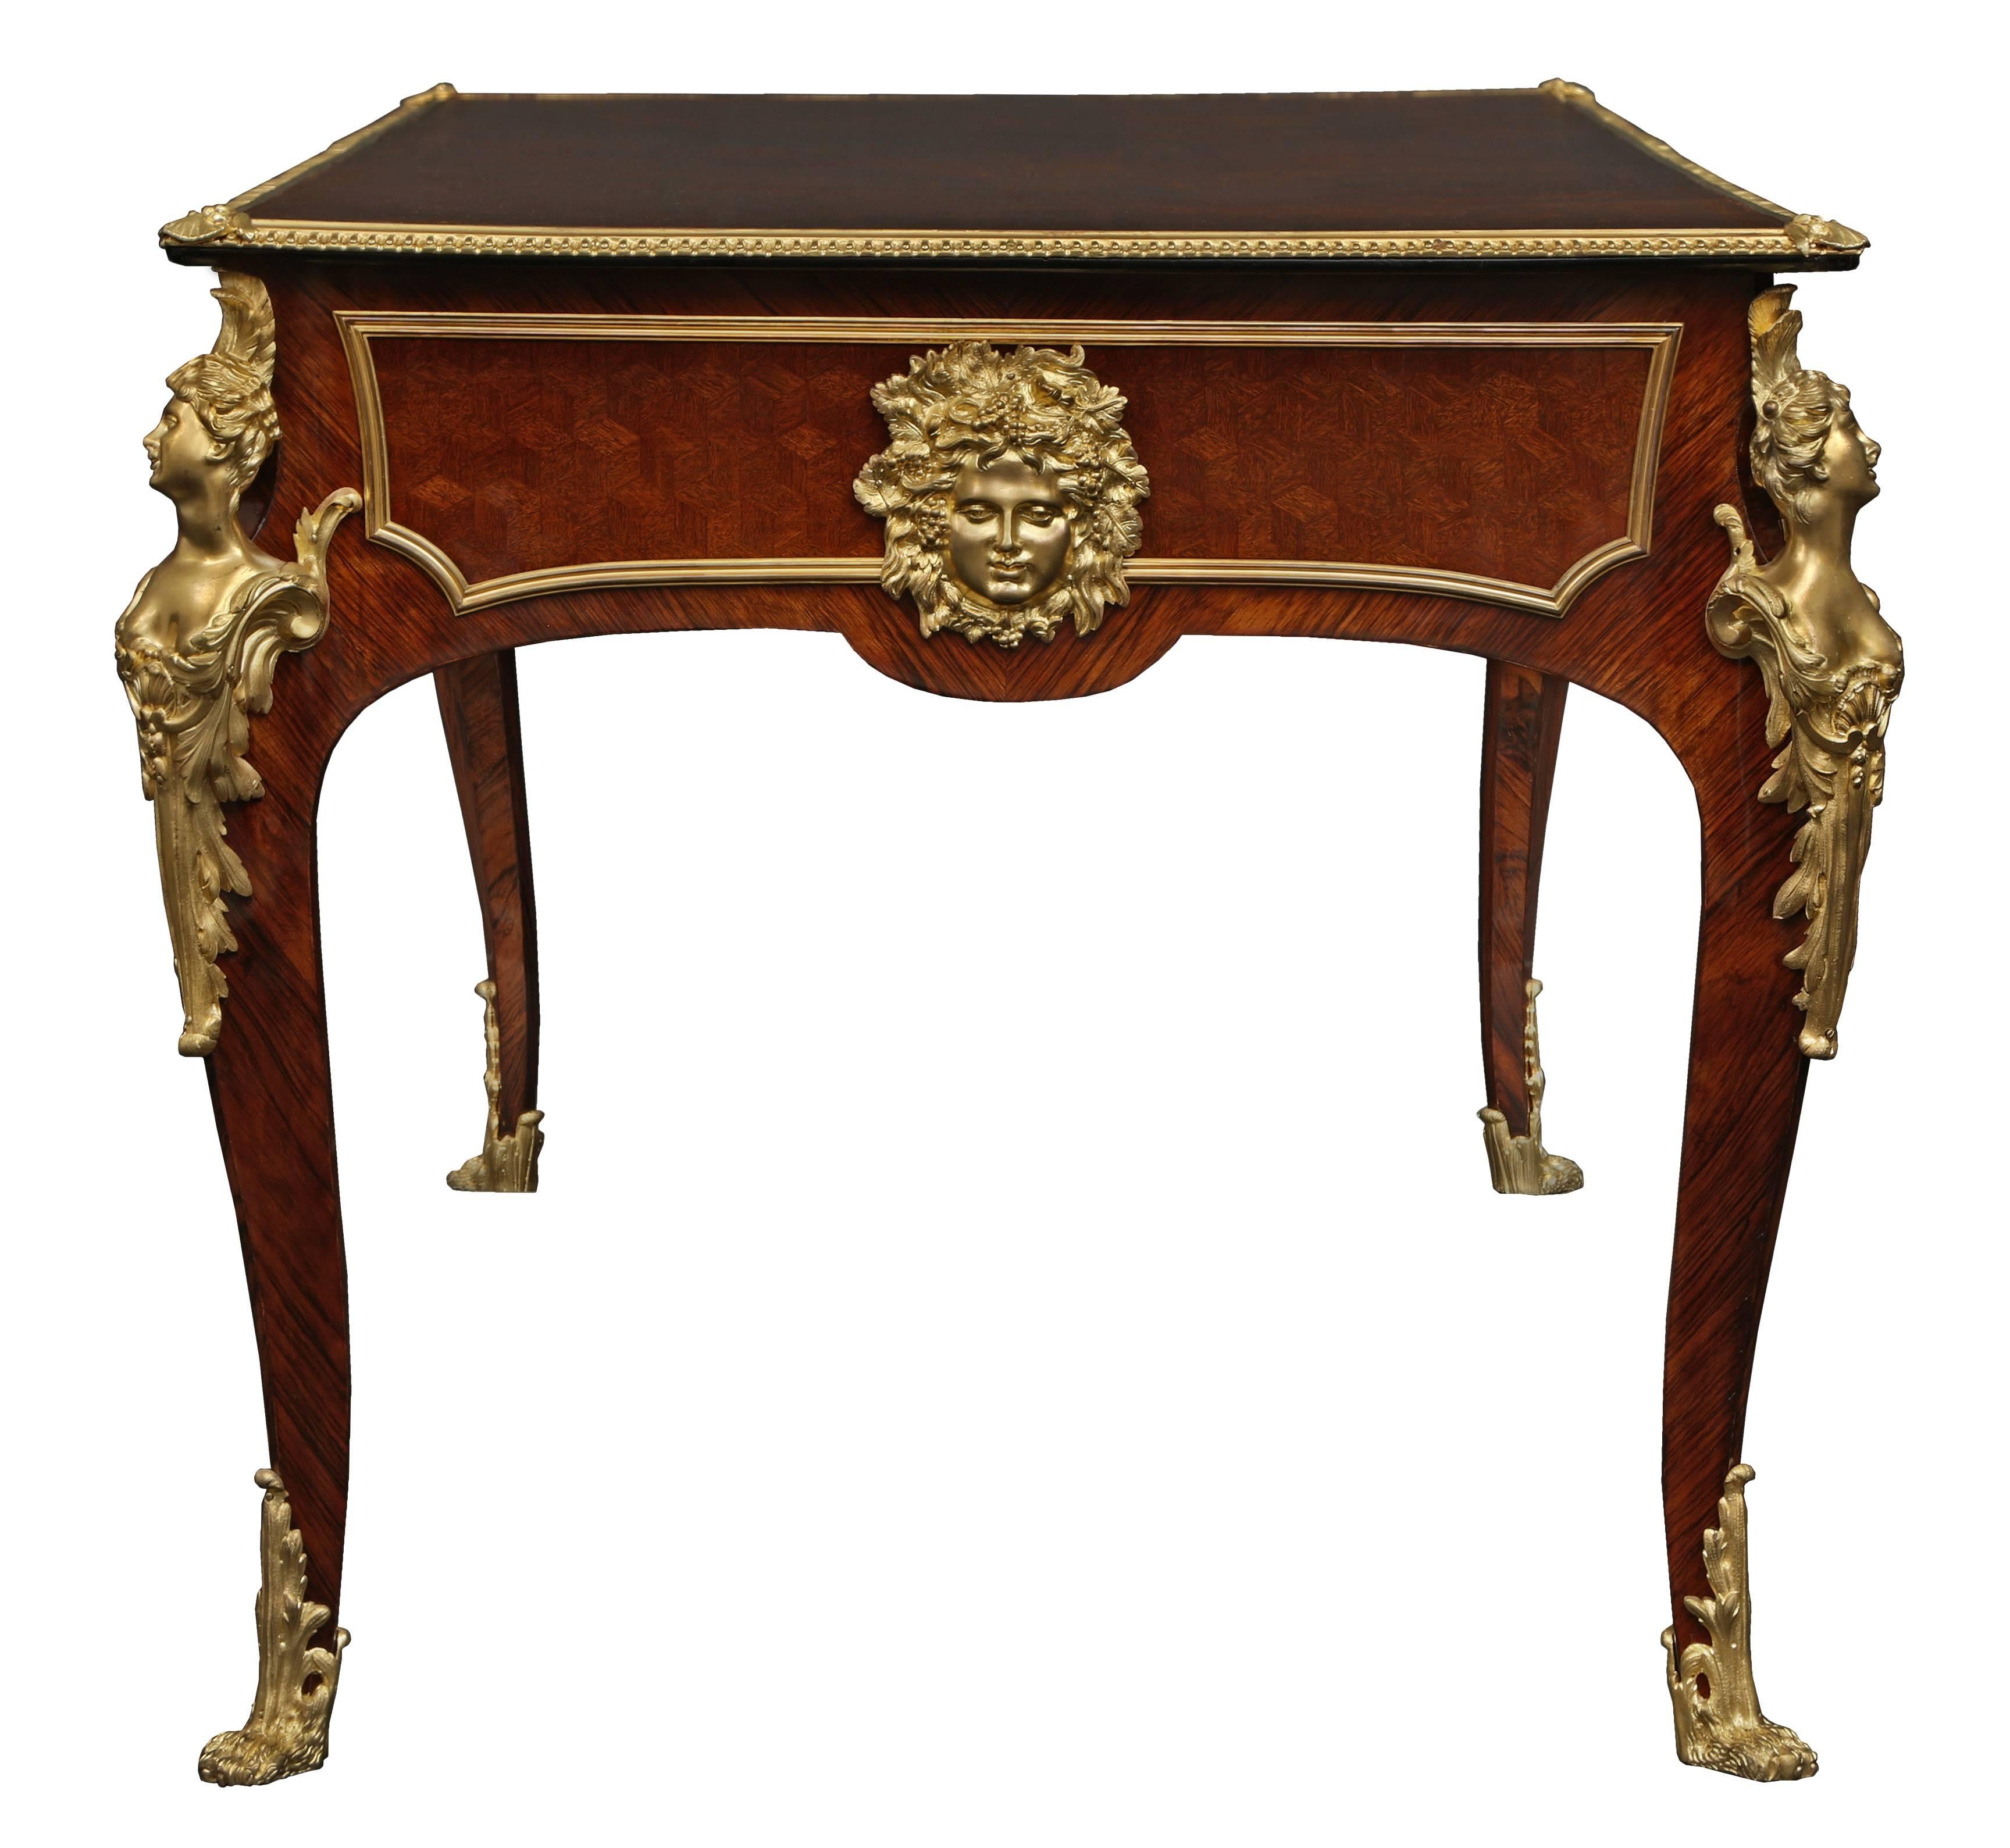 Louis XV French 19th Century Bureau Plat and Desk Chair, Possibly by François Linke